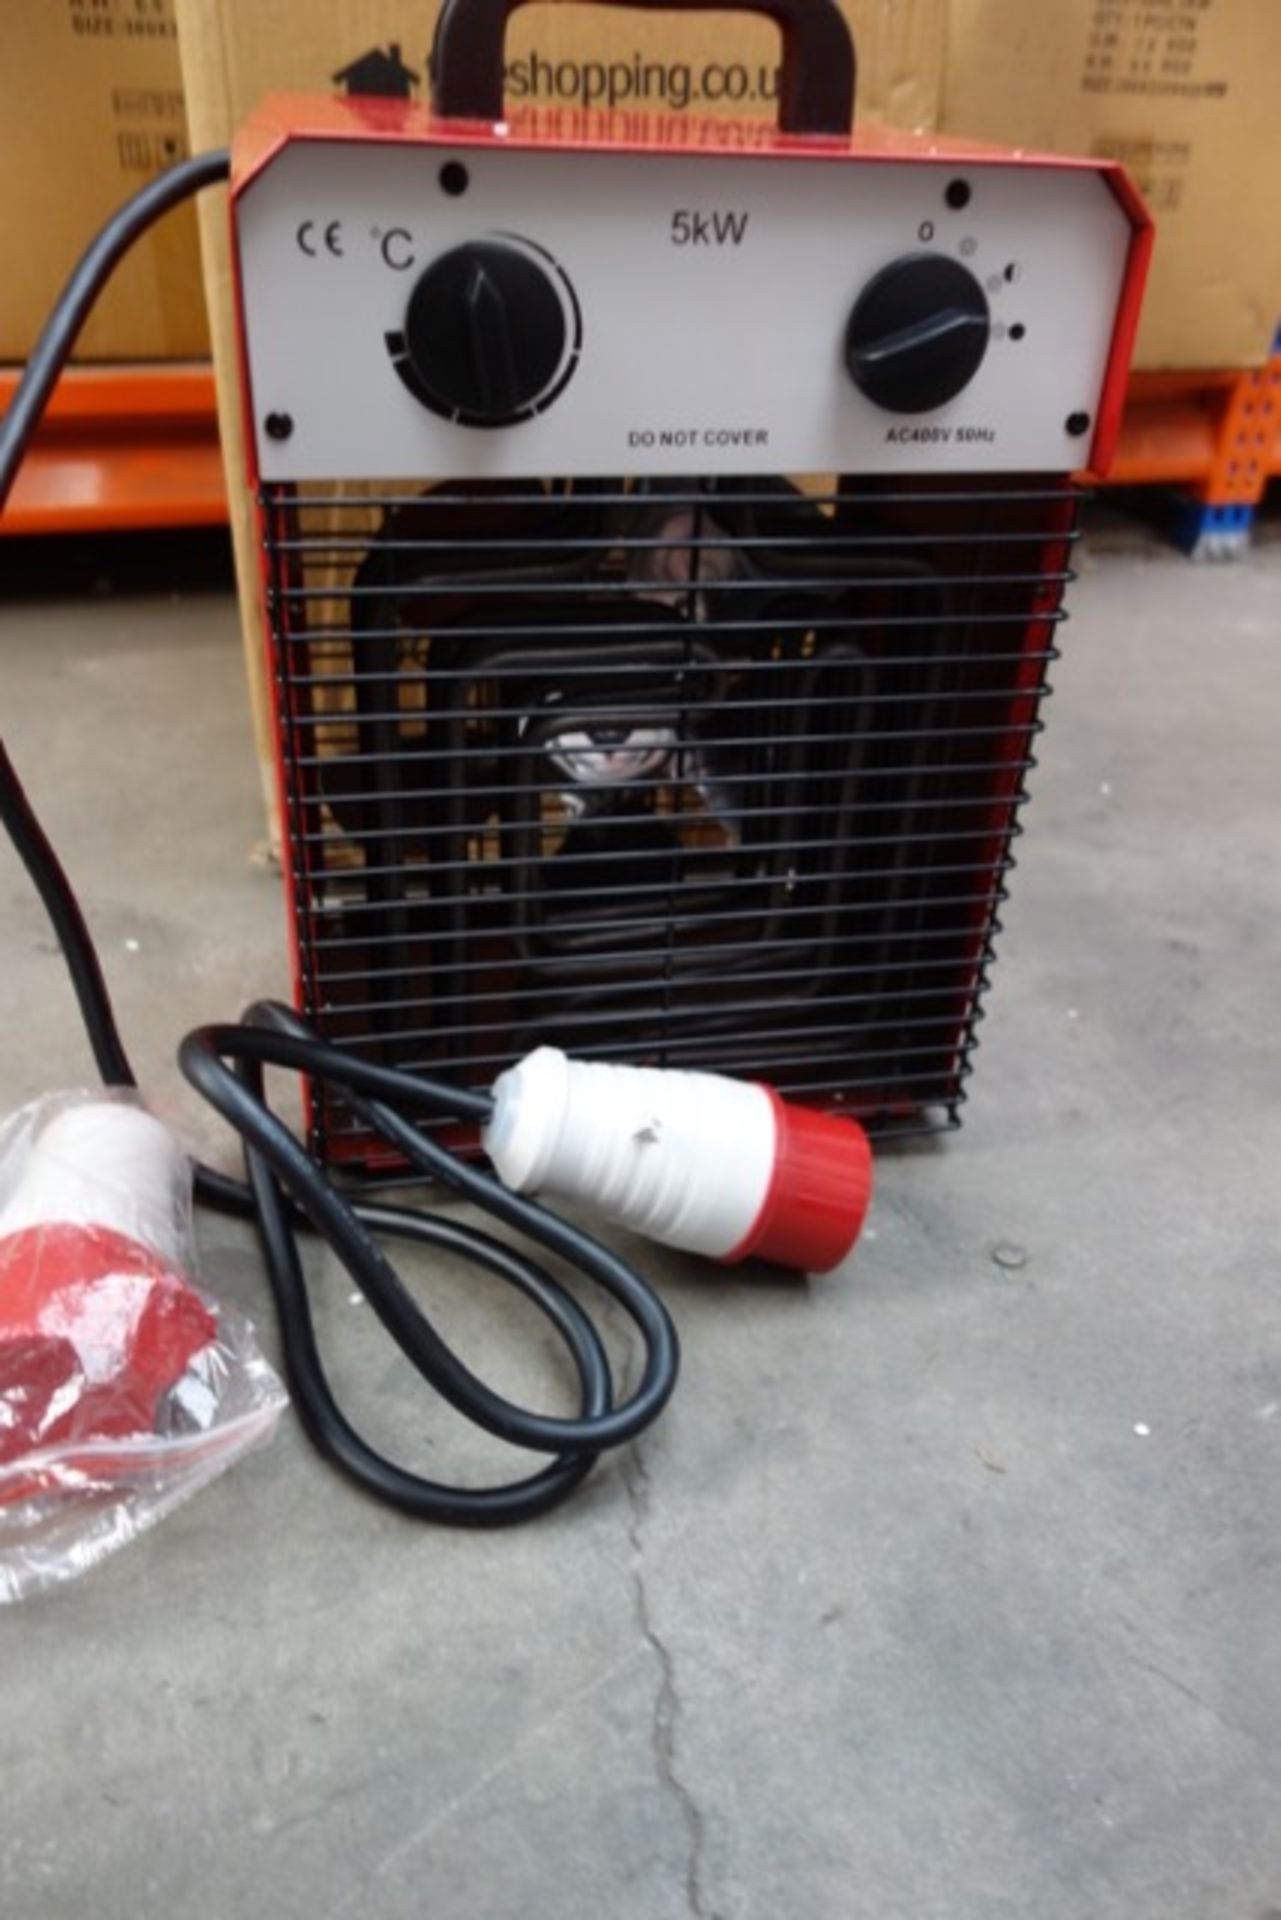 1 x 5KW Industrial Fan Heater. 400v-50Hz 5KW. Very high heat output. RRP £199.99. - Image 2 of 2